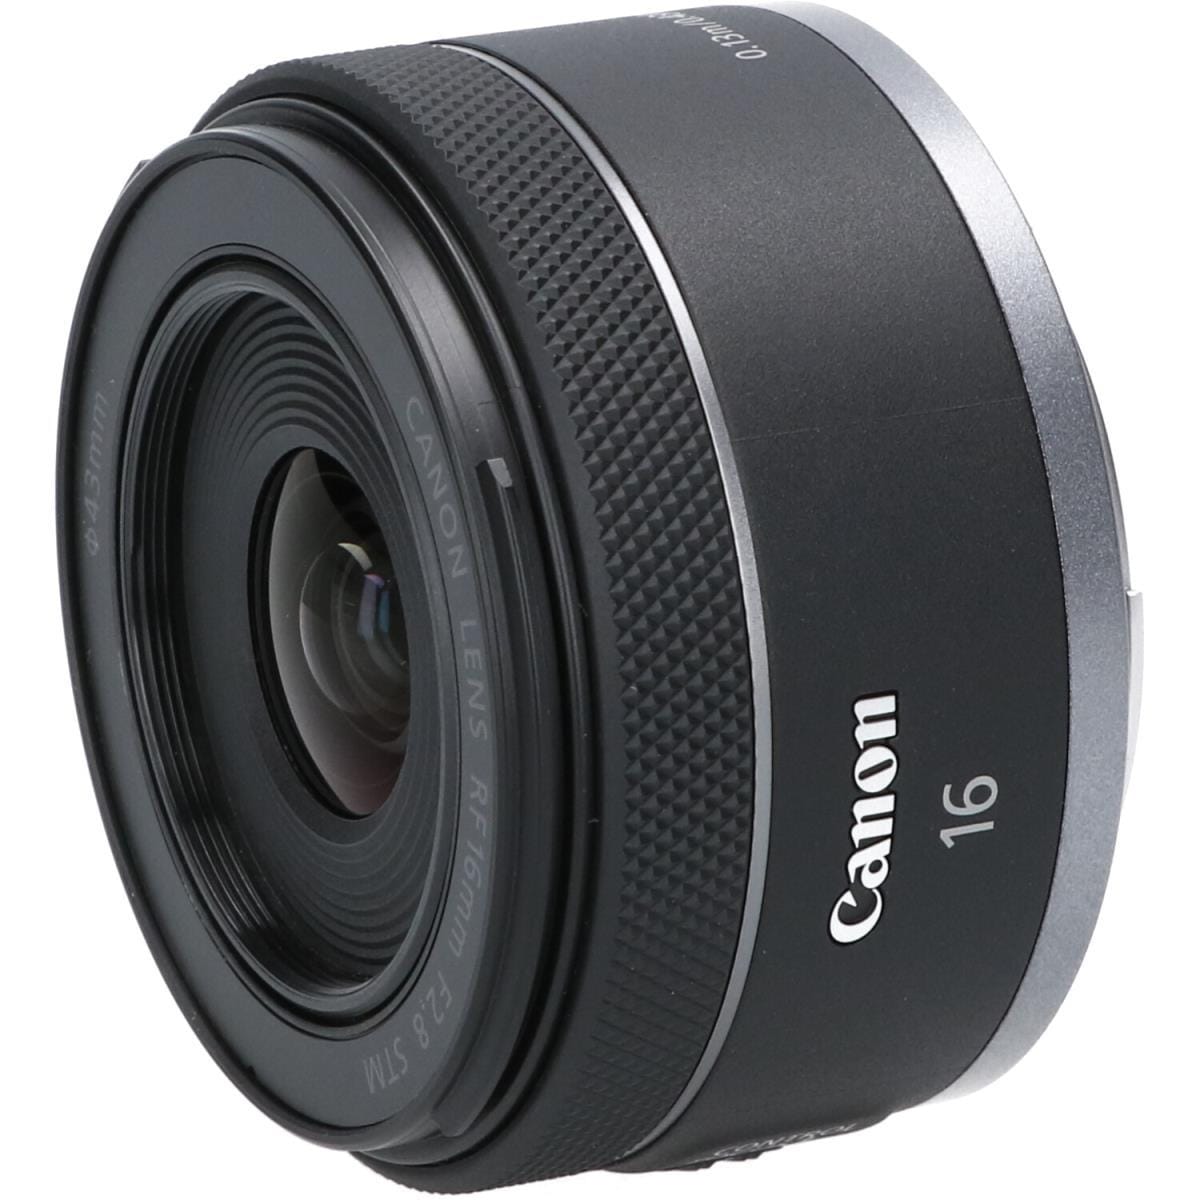 CANON RF16mm F2.8STM